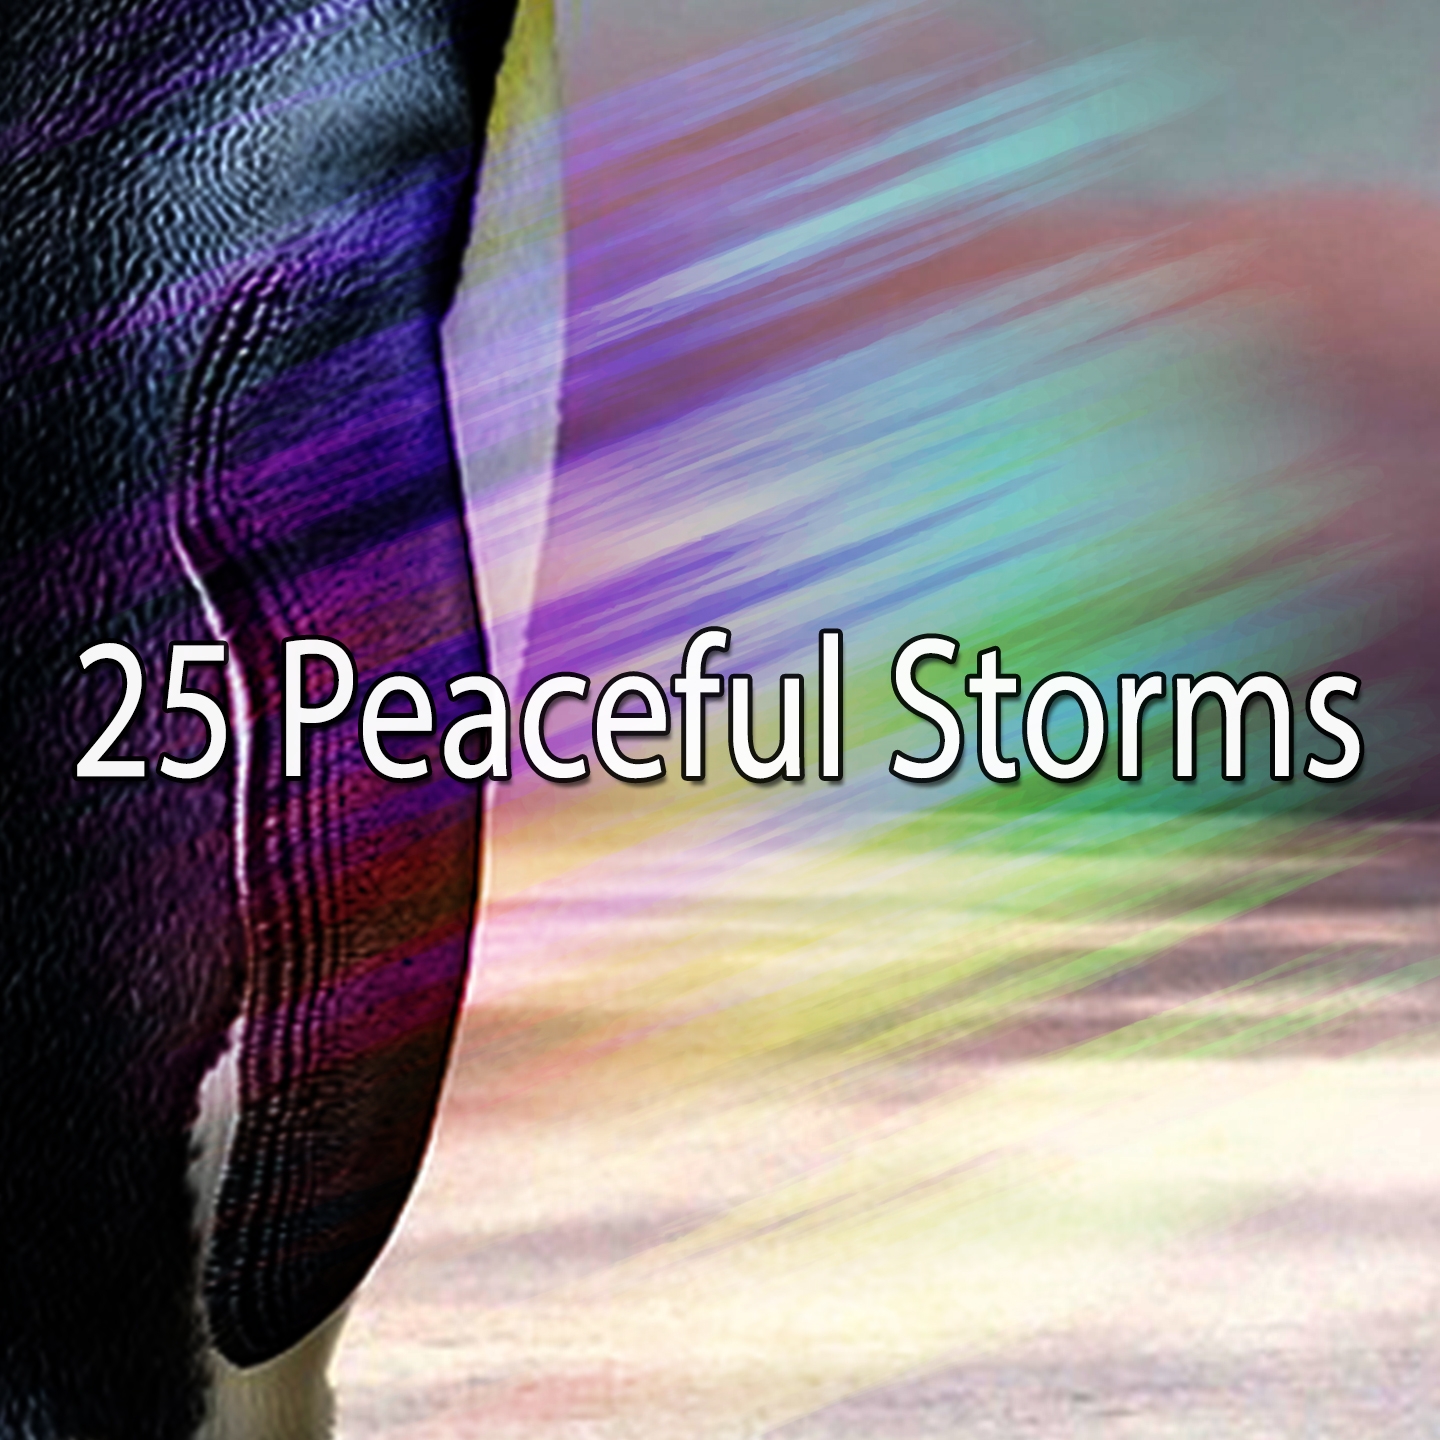 25 Peaceful Storms